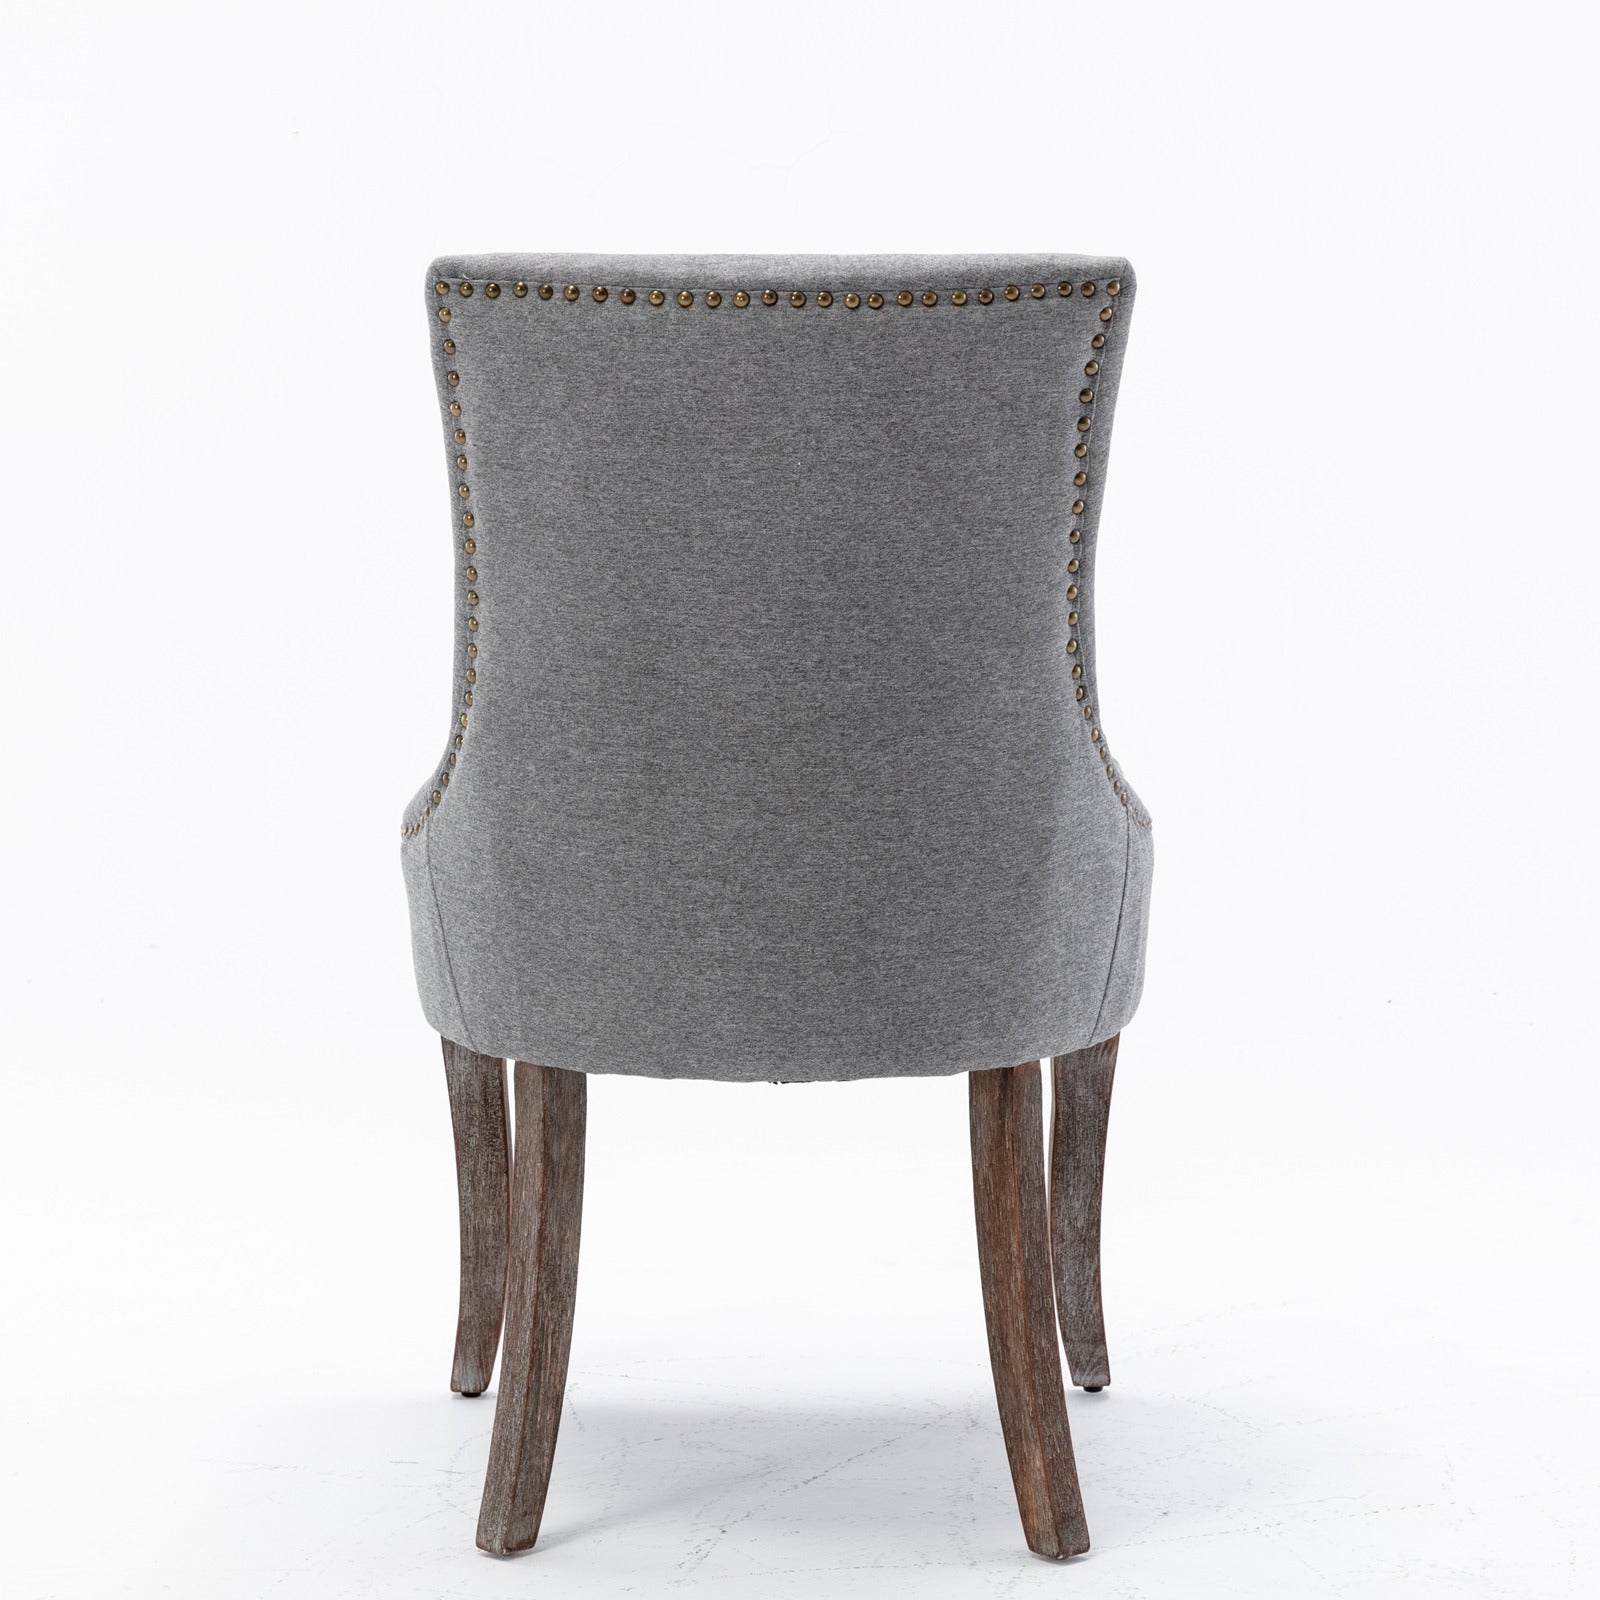 A&A Furniture Dining Chairs with Thickened Padded Seats & Weathered Legs Set of 2 - Gray